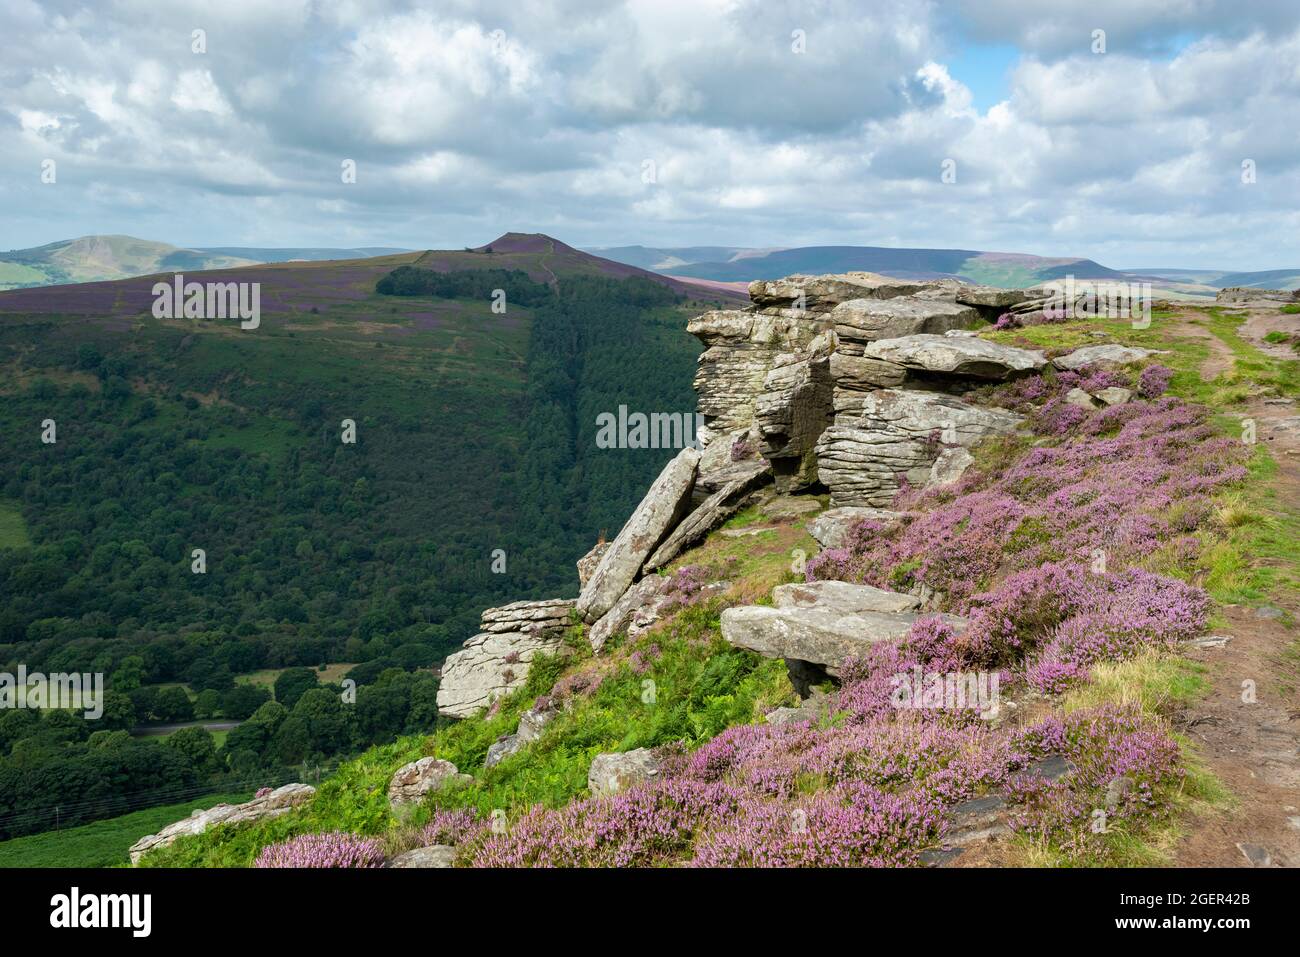 Bamford Edge and Win Hill with heather blooming between the rocks, Peak District national park, Derbyshire, England. Stock Photo